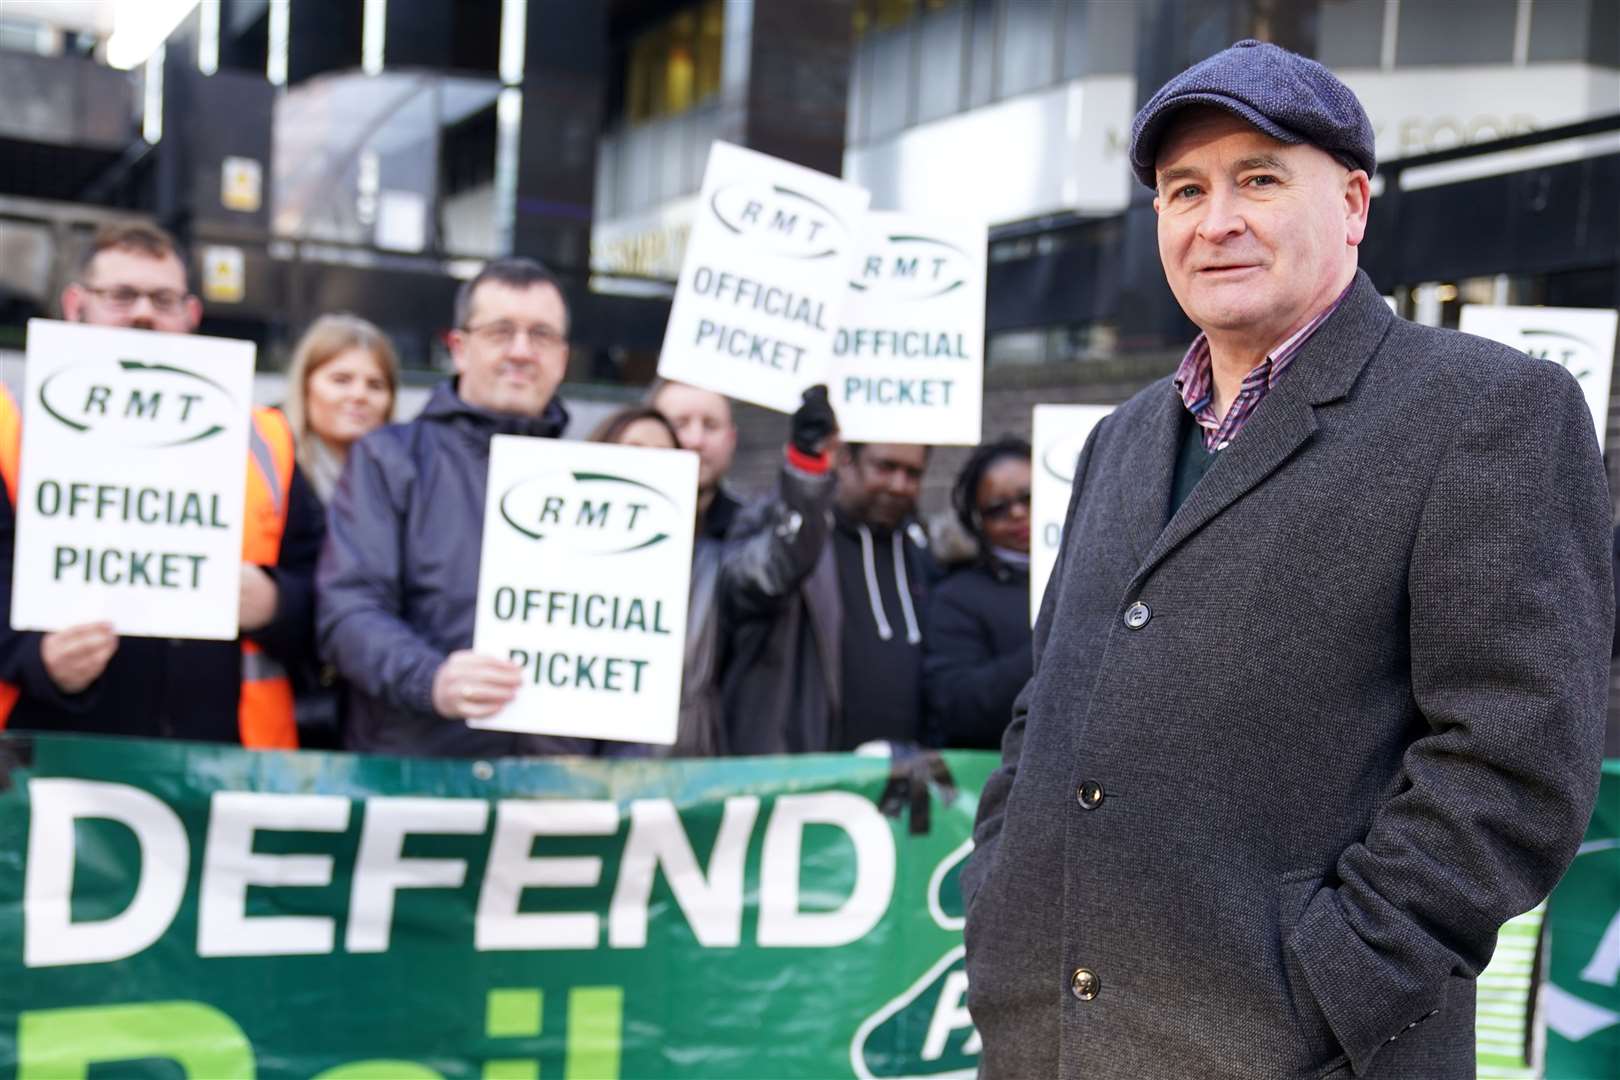 Mick Lynch, general secretary of the RMT union, joins union members on the picket line outside Euston station in London during a rail strike in a long-running dispute (Kirsty O’Connor/PA)